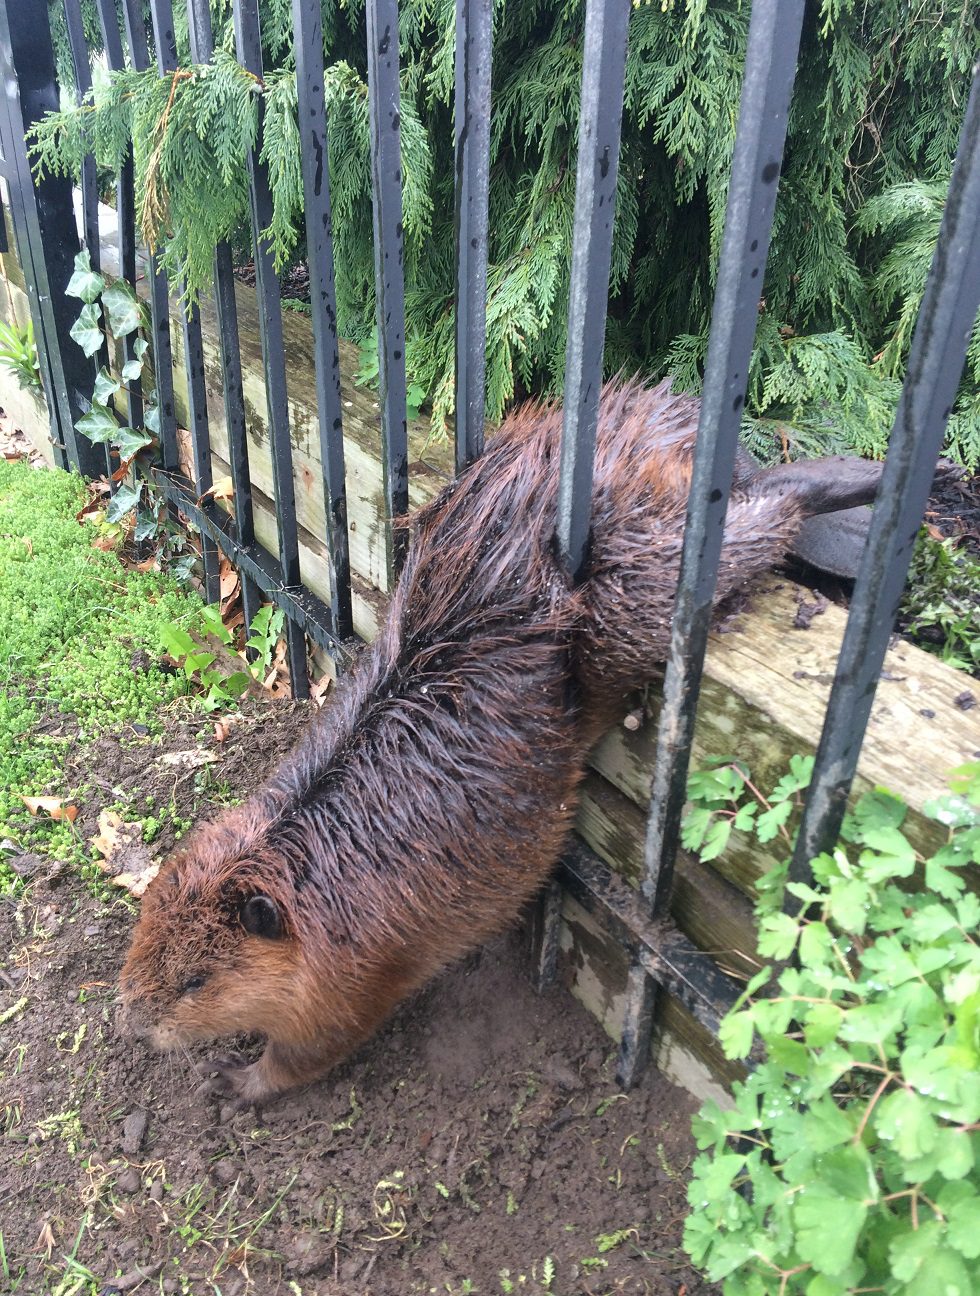 The beaver, prior to being rescued from a wrought iron fence in Hamilton.